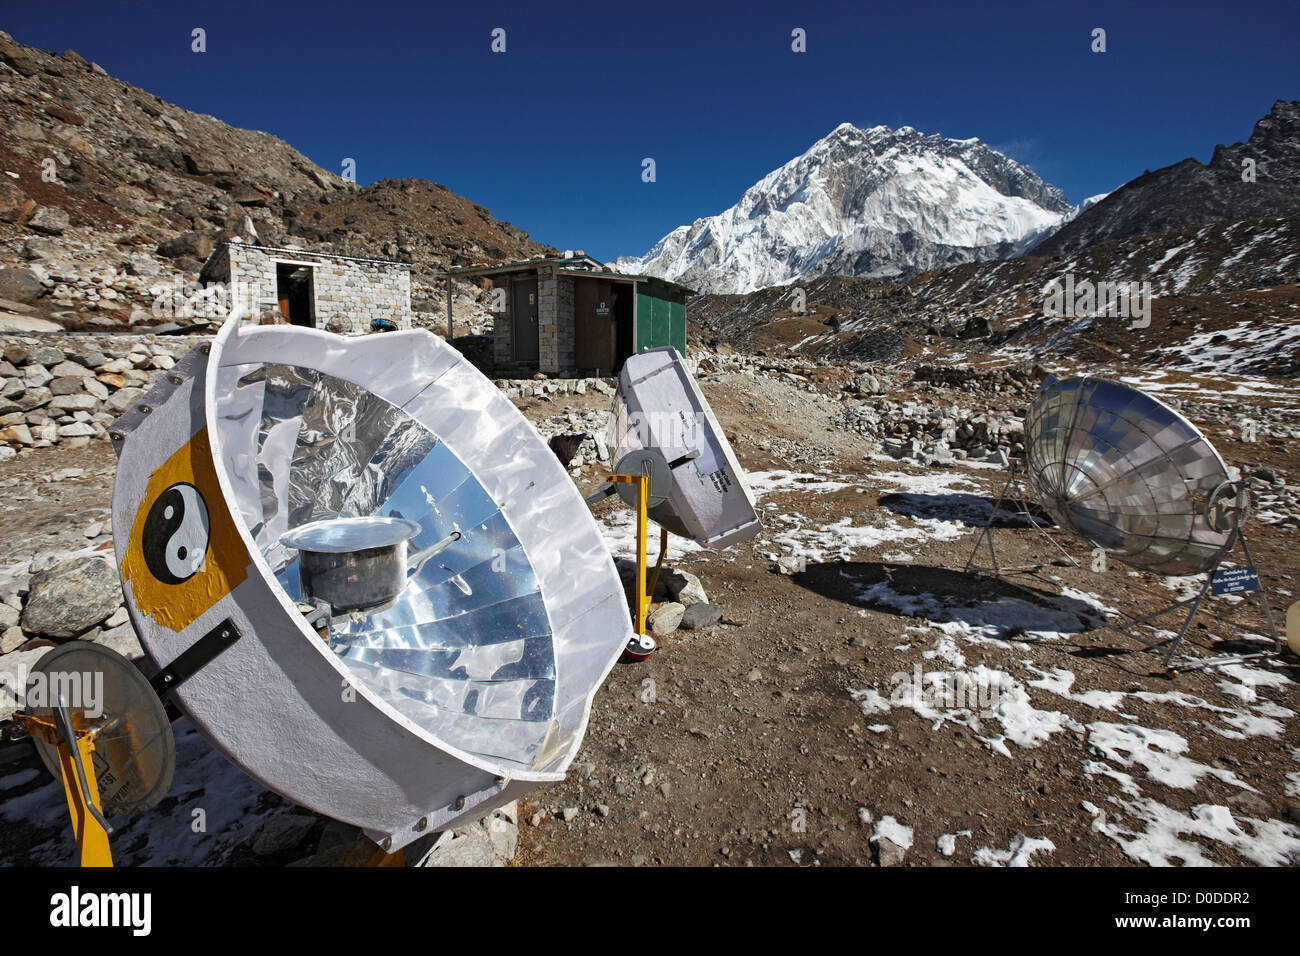 A parabolic solar water heater heats a bowl of water at Lobuche, Nepal, in the Mount Everest region. Stock Photo